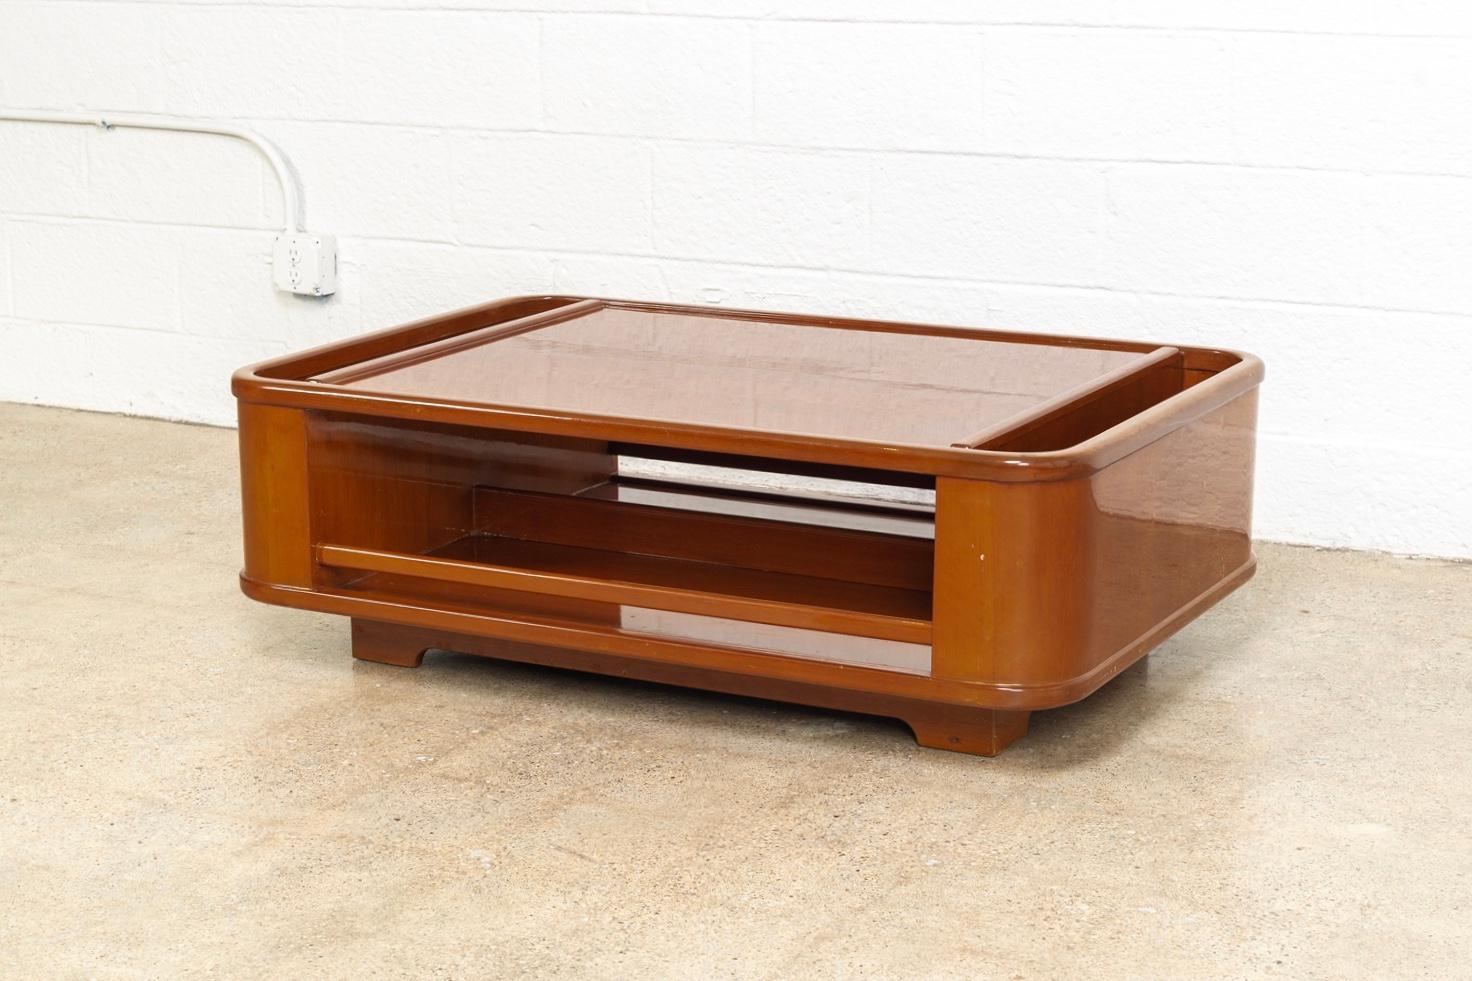 This vintage midcentury Italian coffee table circa 1970 has fabulous mod style. The Minimalist design features a low profile with clean geometric lines and rounded edges. It is well constructed from solid wood with a glossy lacquered enamel surface.